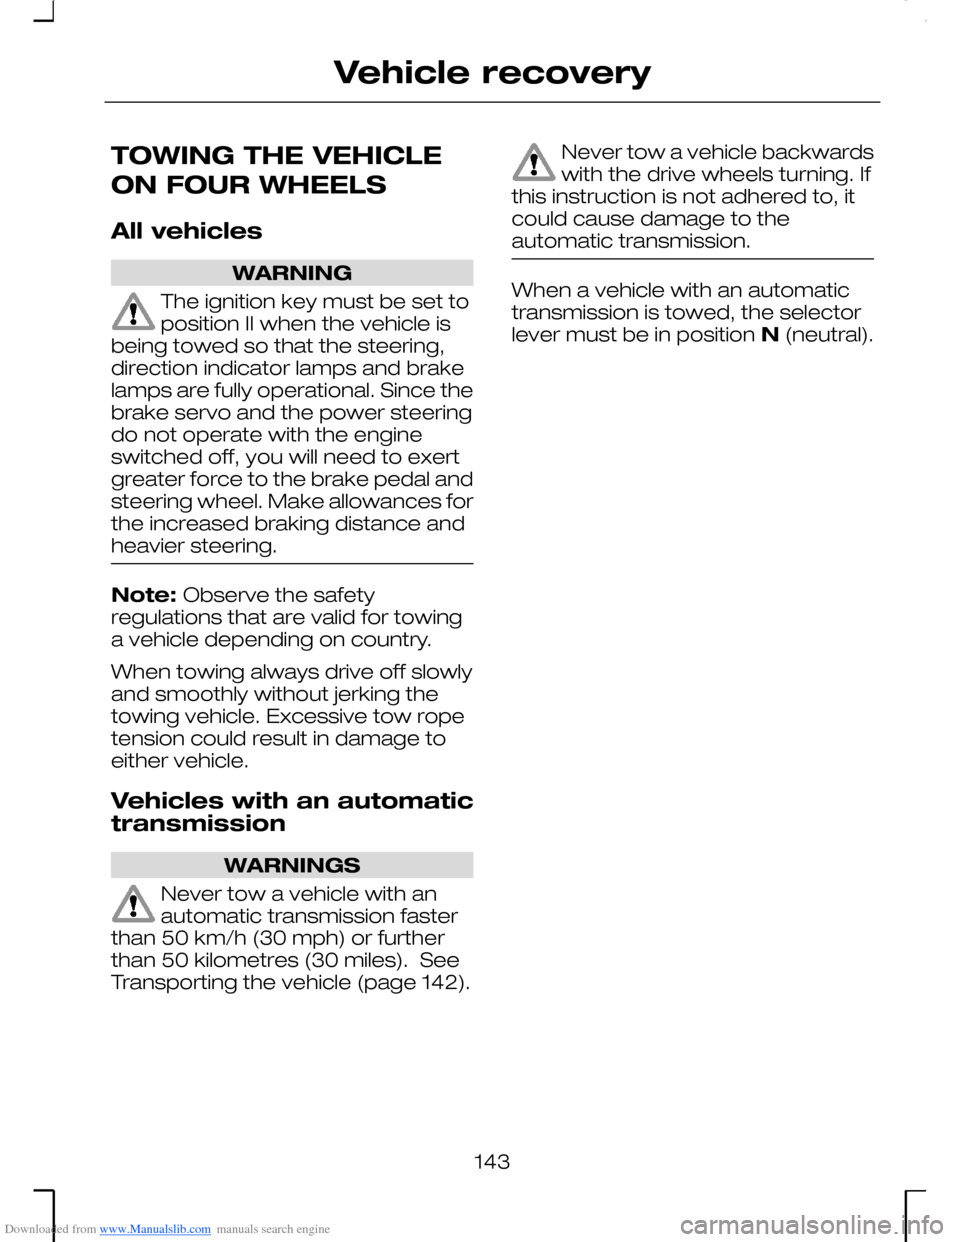 FORD MONDEO 2006 2.G Owners Manual Downloaded from www.Manualslib.com manuals search engine TOWING THE VEHICLE
ON FOUR WHEELS
All vehicles
WARNING
The ignition key must be set toposition II when the vehicle isbeing towed so that the st